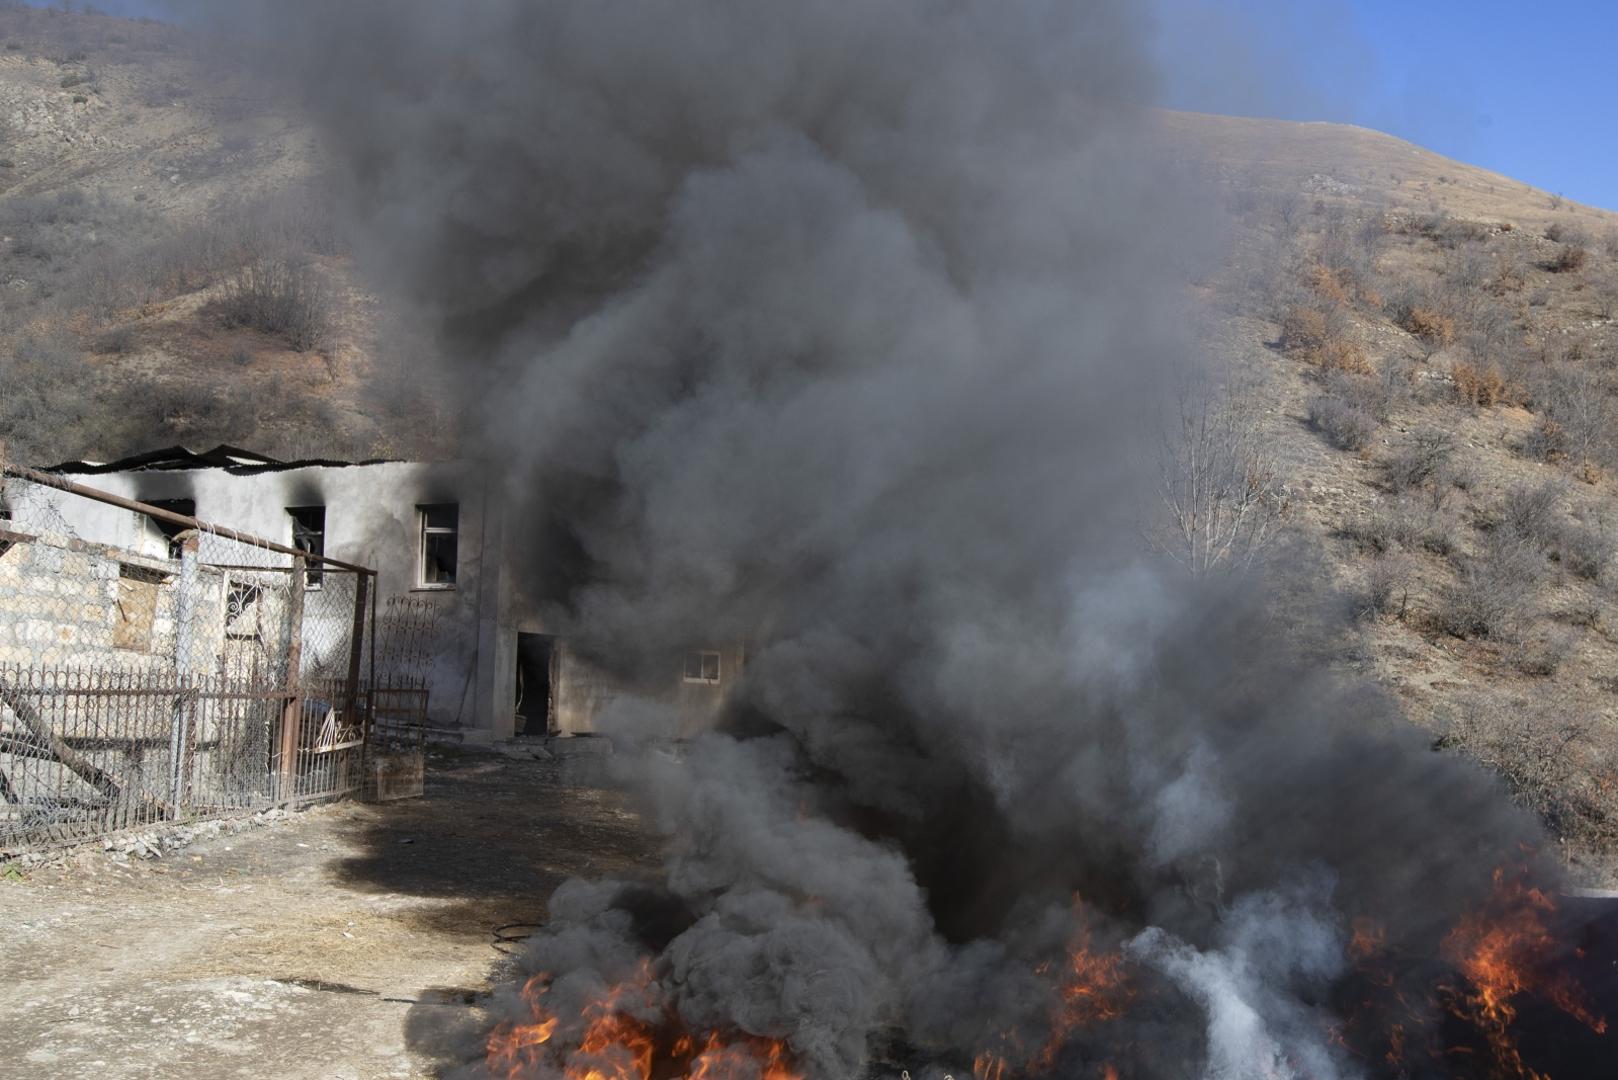 NAGORNO-KARABAKH - NOBEMBER 24, 2020: A house left to burn in the village of Nor Karachinar situated within the territory of Kalbajar District bound to return to Azerbaijan. The conflict between Armenia and Azerbaijan over the Nagorno-Karabakh territory rapidly escalated on 27 September. More recently, on 9 November, the leaders of Armenia, Russia and Azerbaijan signed an agreement on a complete ceasefire as well as deployment of the Russian peacekeeping forces in the disputed Caucasus region. Stanislav Krasilnikov/TASS Photo via Newscom Newscom/PIXSELL